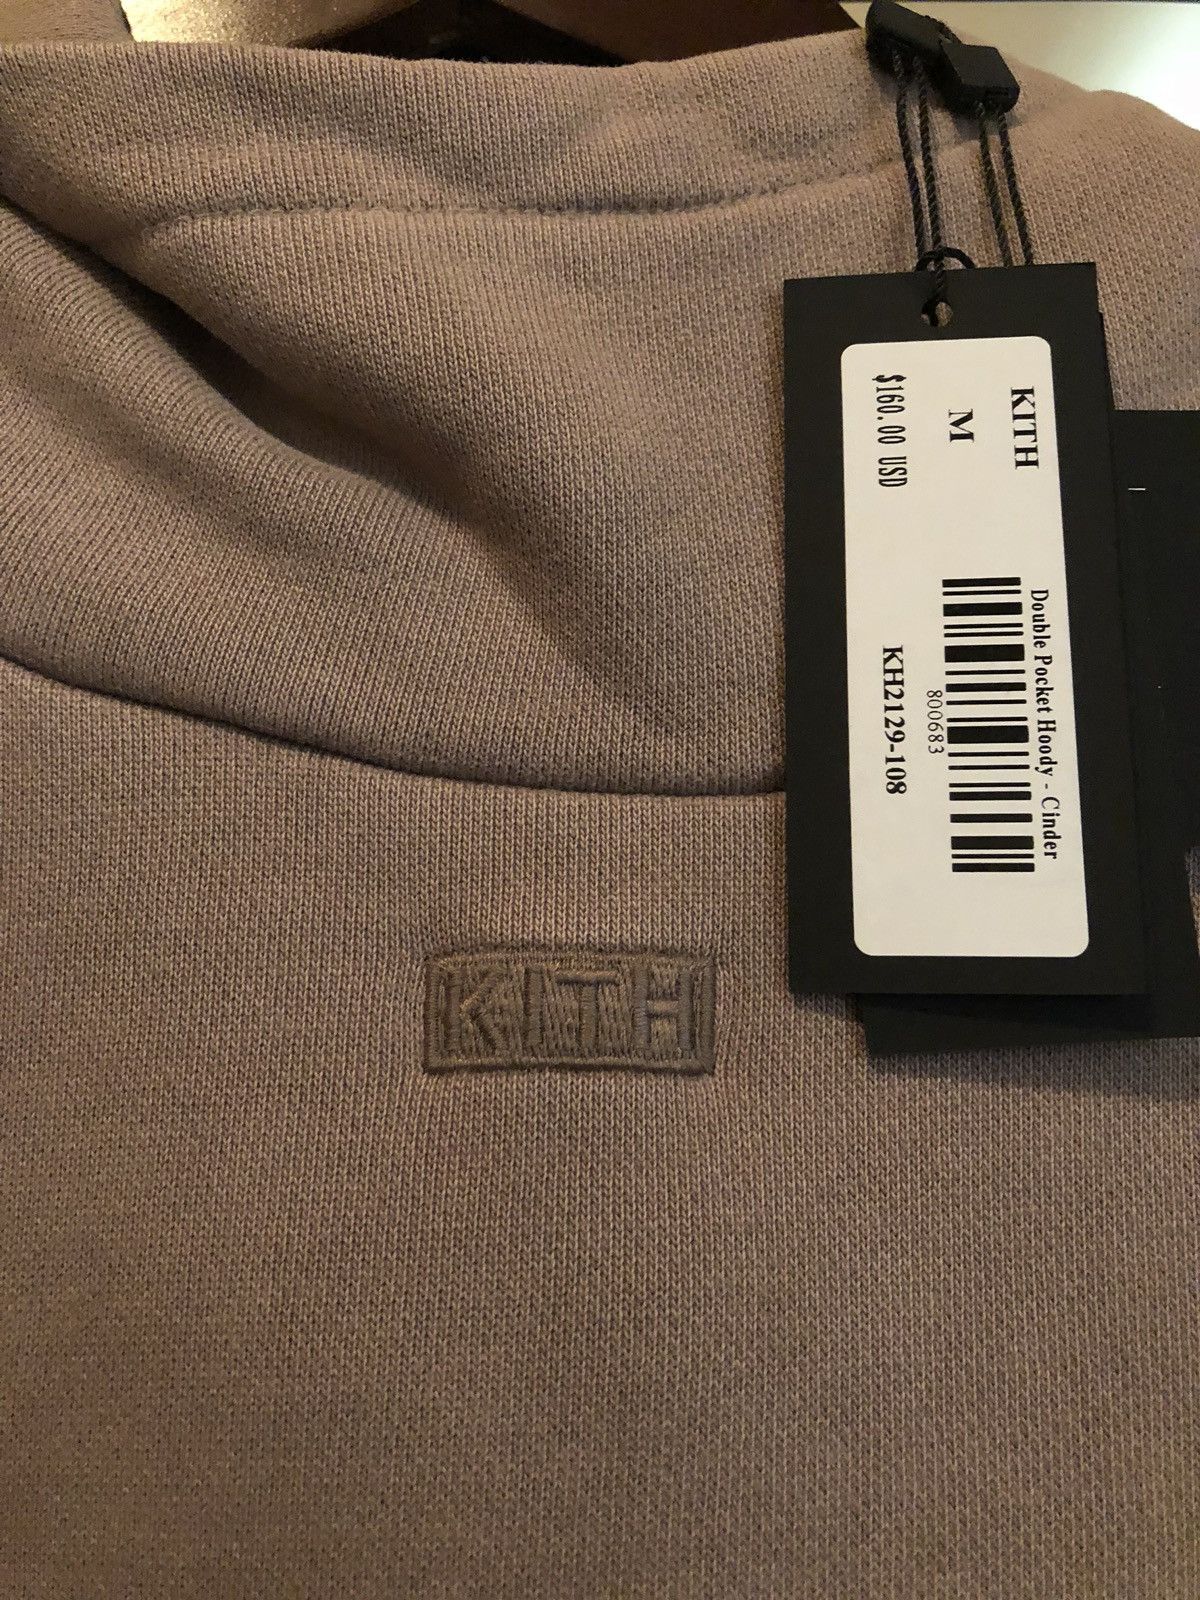 Kith Kith Double Pocket Hoodie Size US M / EU 48-50 / 2 - 2 Preview